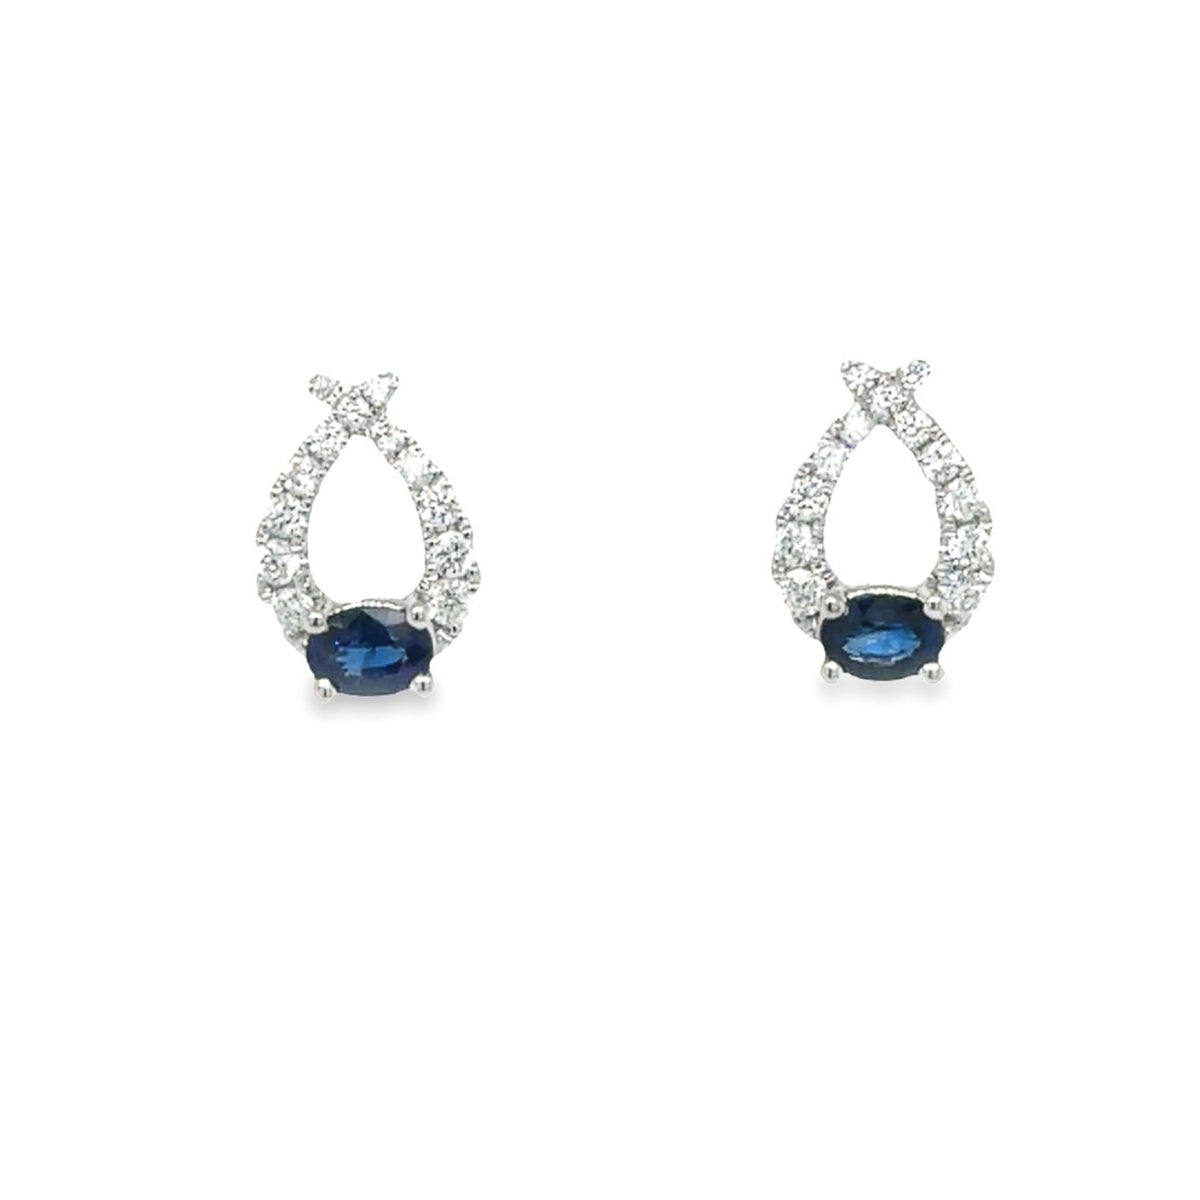 14Kt White Gold Drop Earrings Gemstone Earrings With Diamond and Blue Sapphires